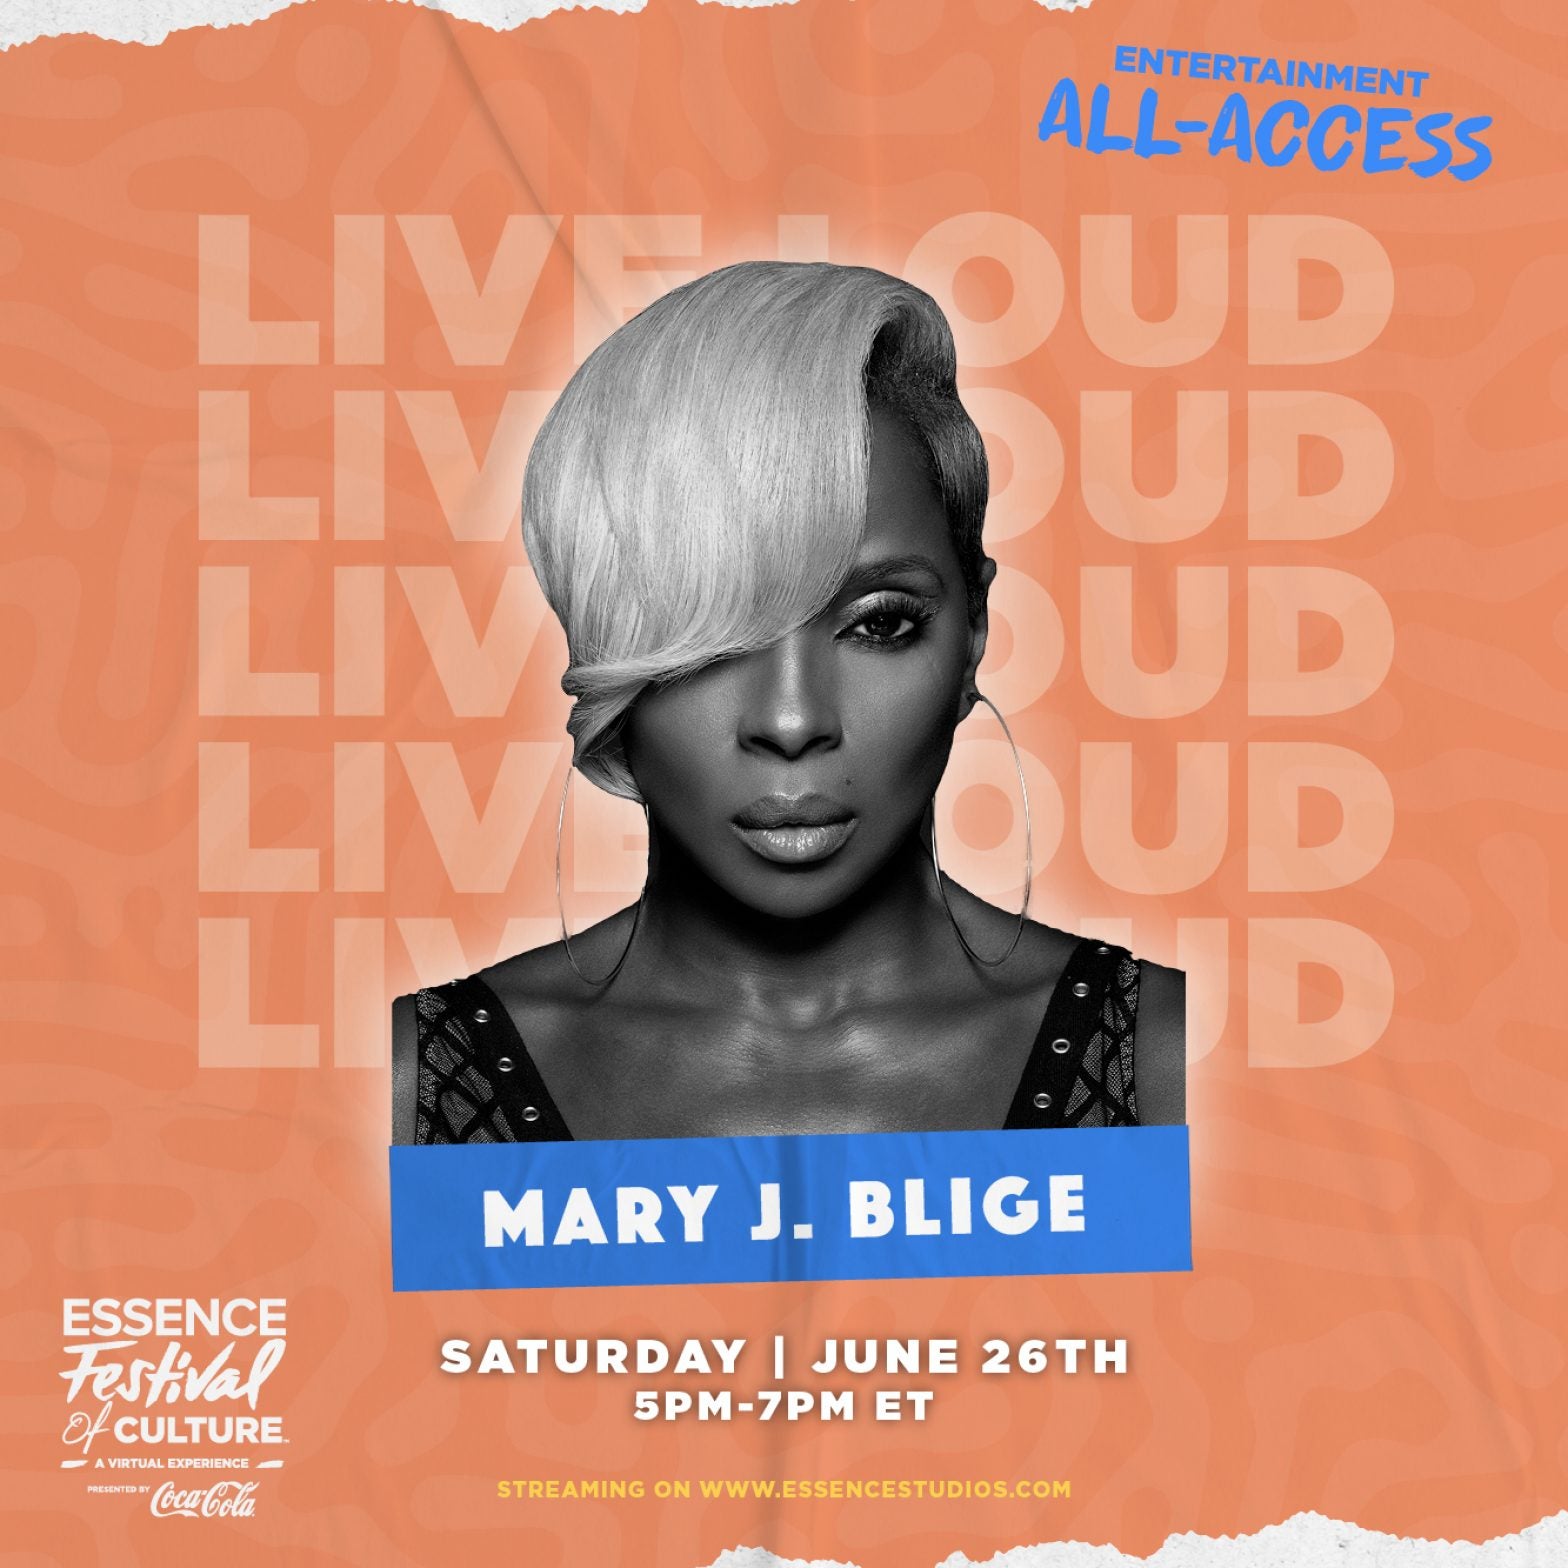 Get Free Passes Now To Hear From Brandy, Eve, Mary J. Blige And More At ESSENCE Fest 2021!